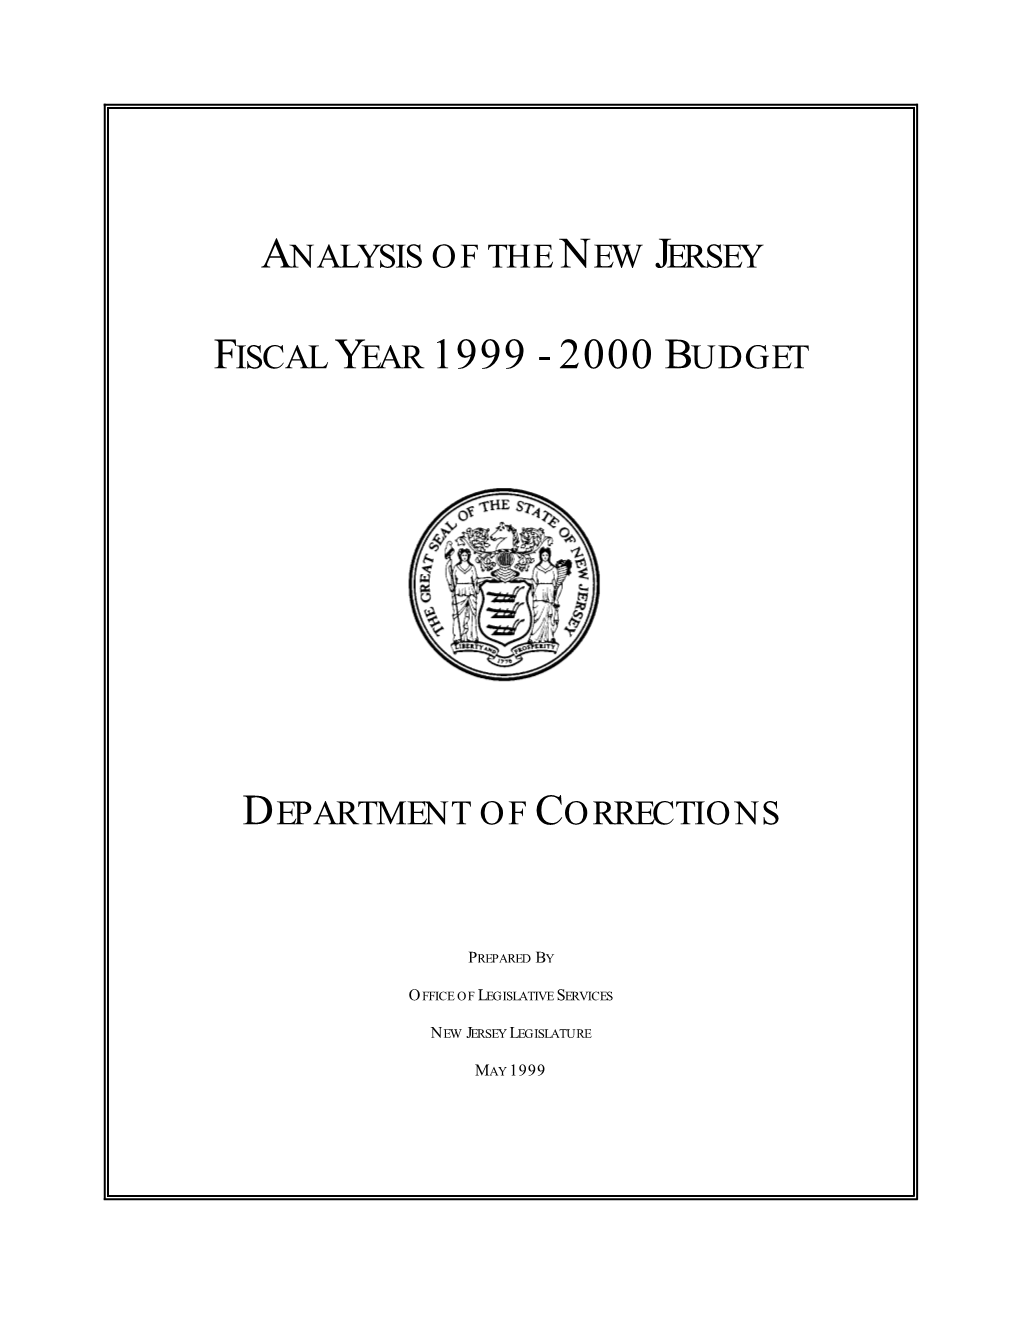 Analysis of the New Jersey Fiscal Year 1999